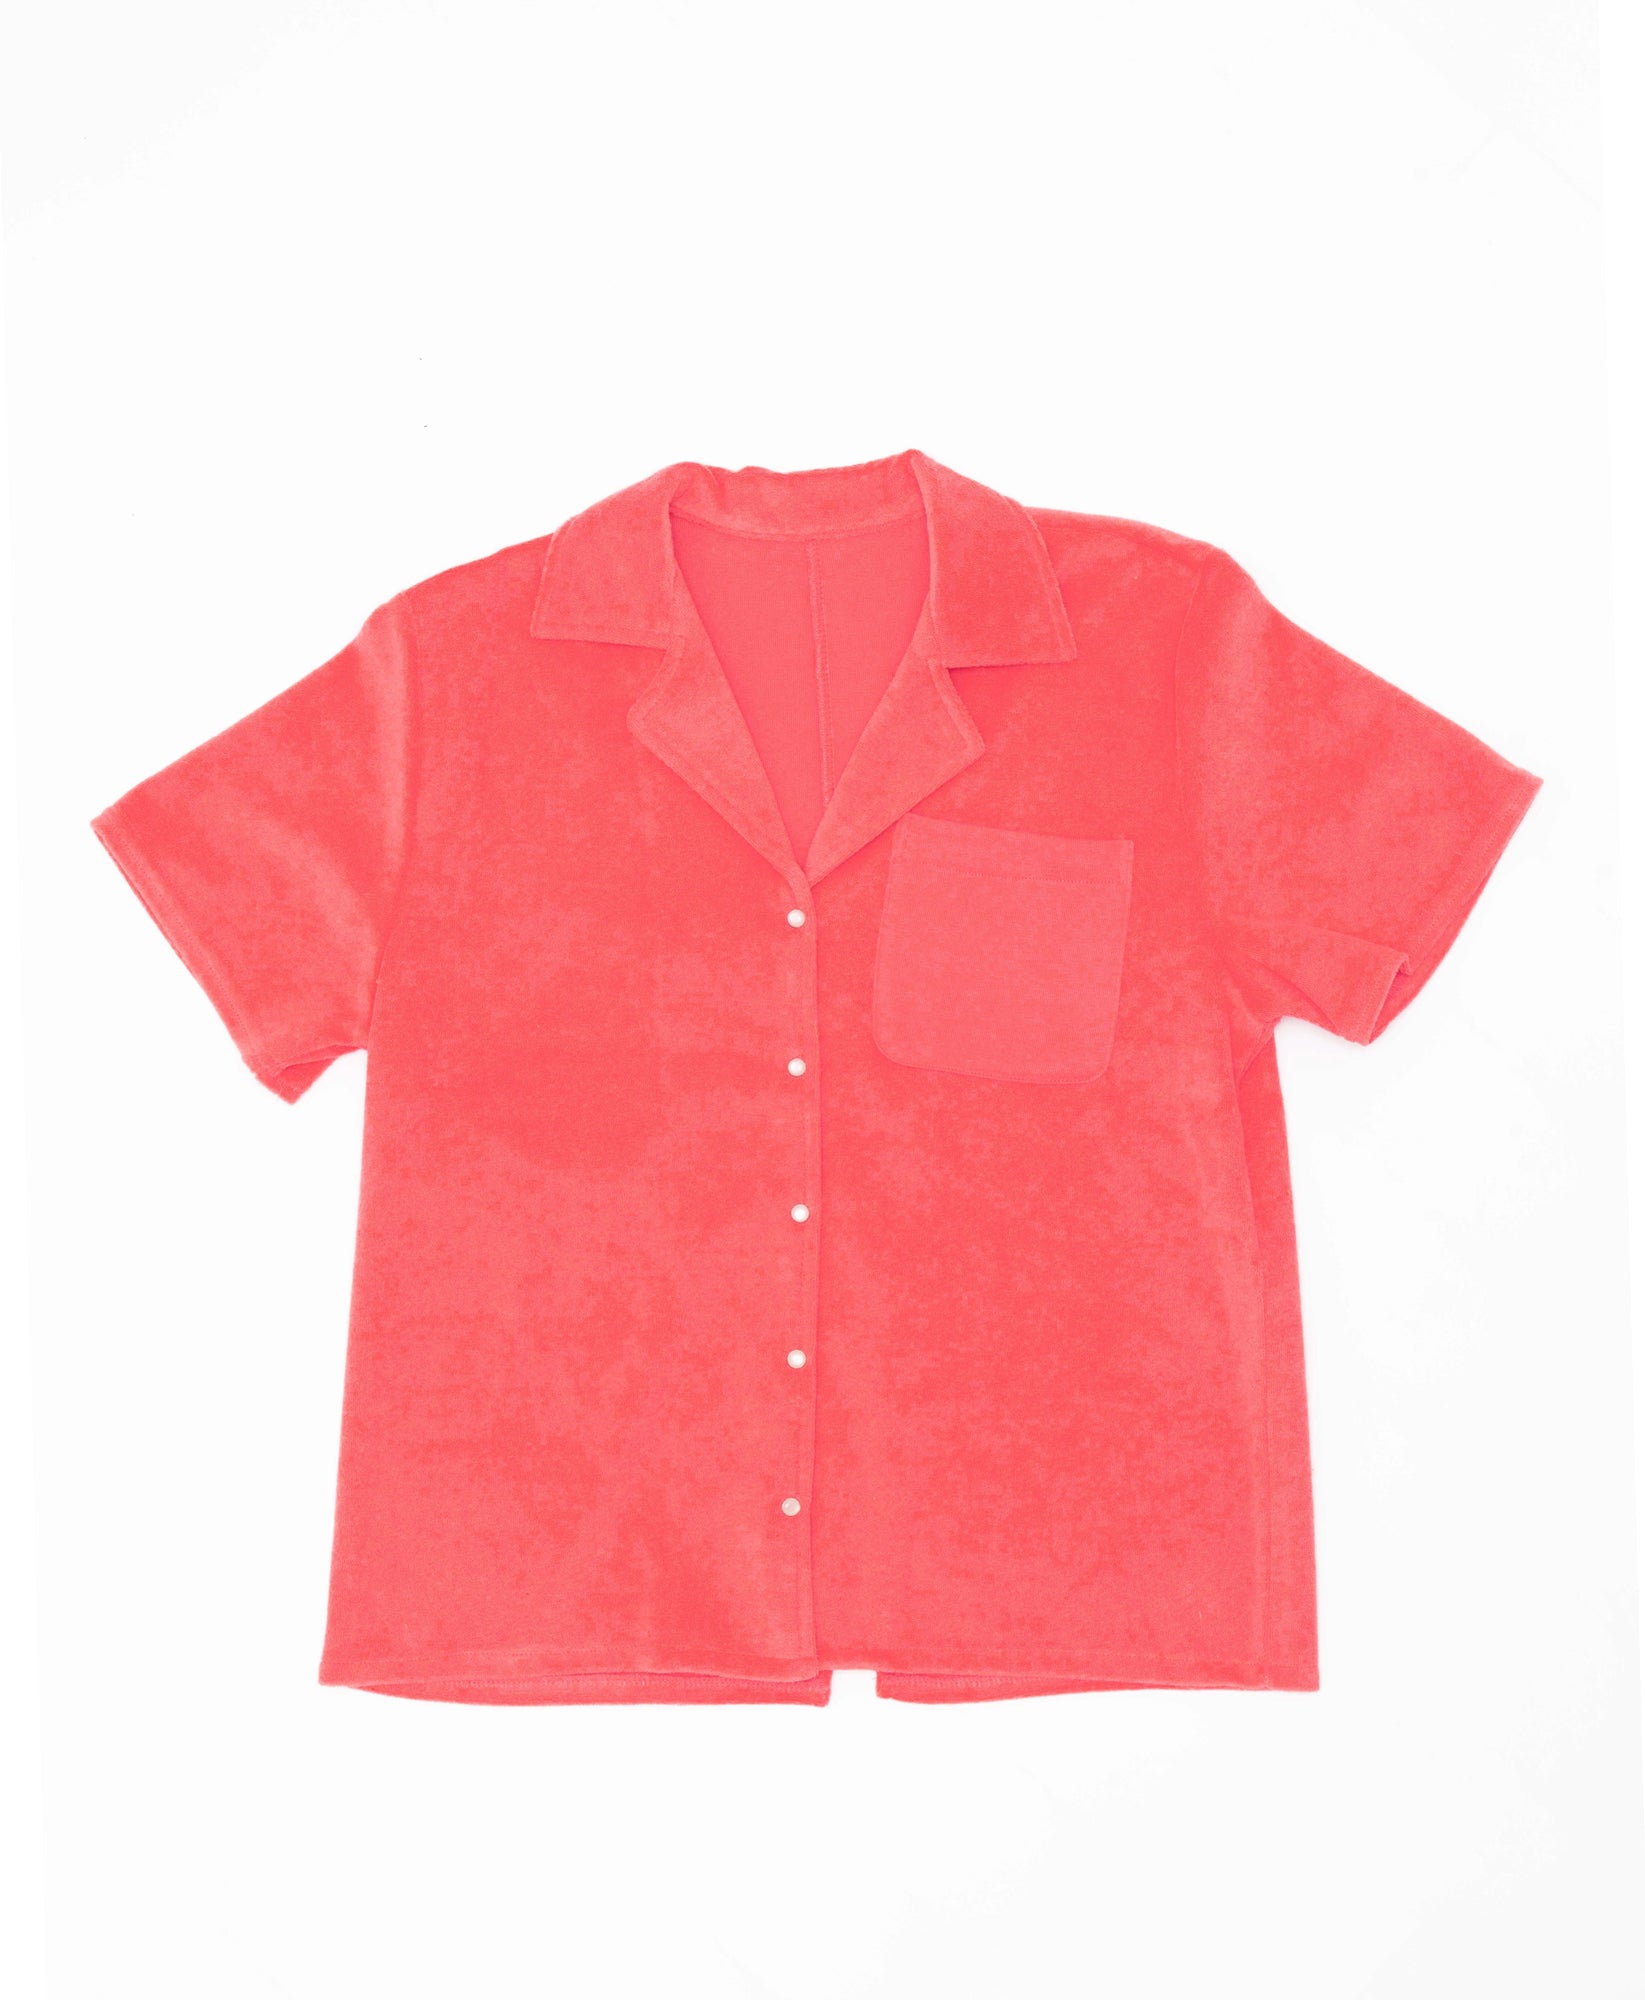 Wear One's At Aqualina Terry Cloth Button Down in Aperol Pink Flat Front